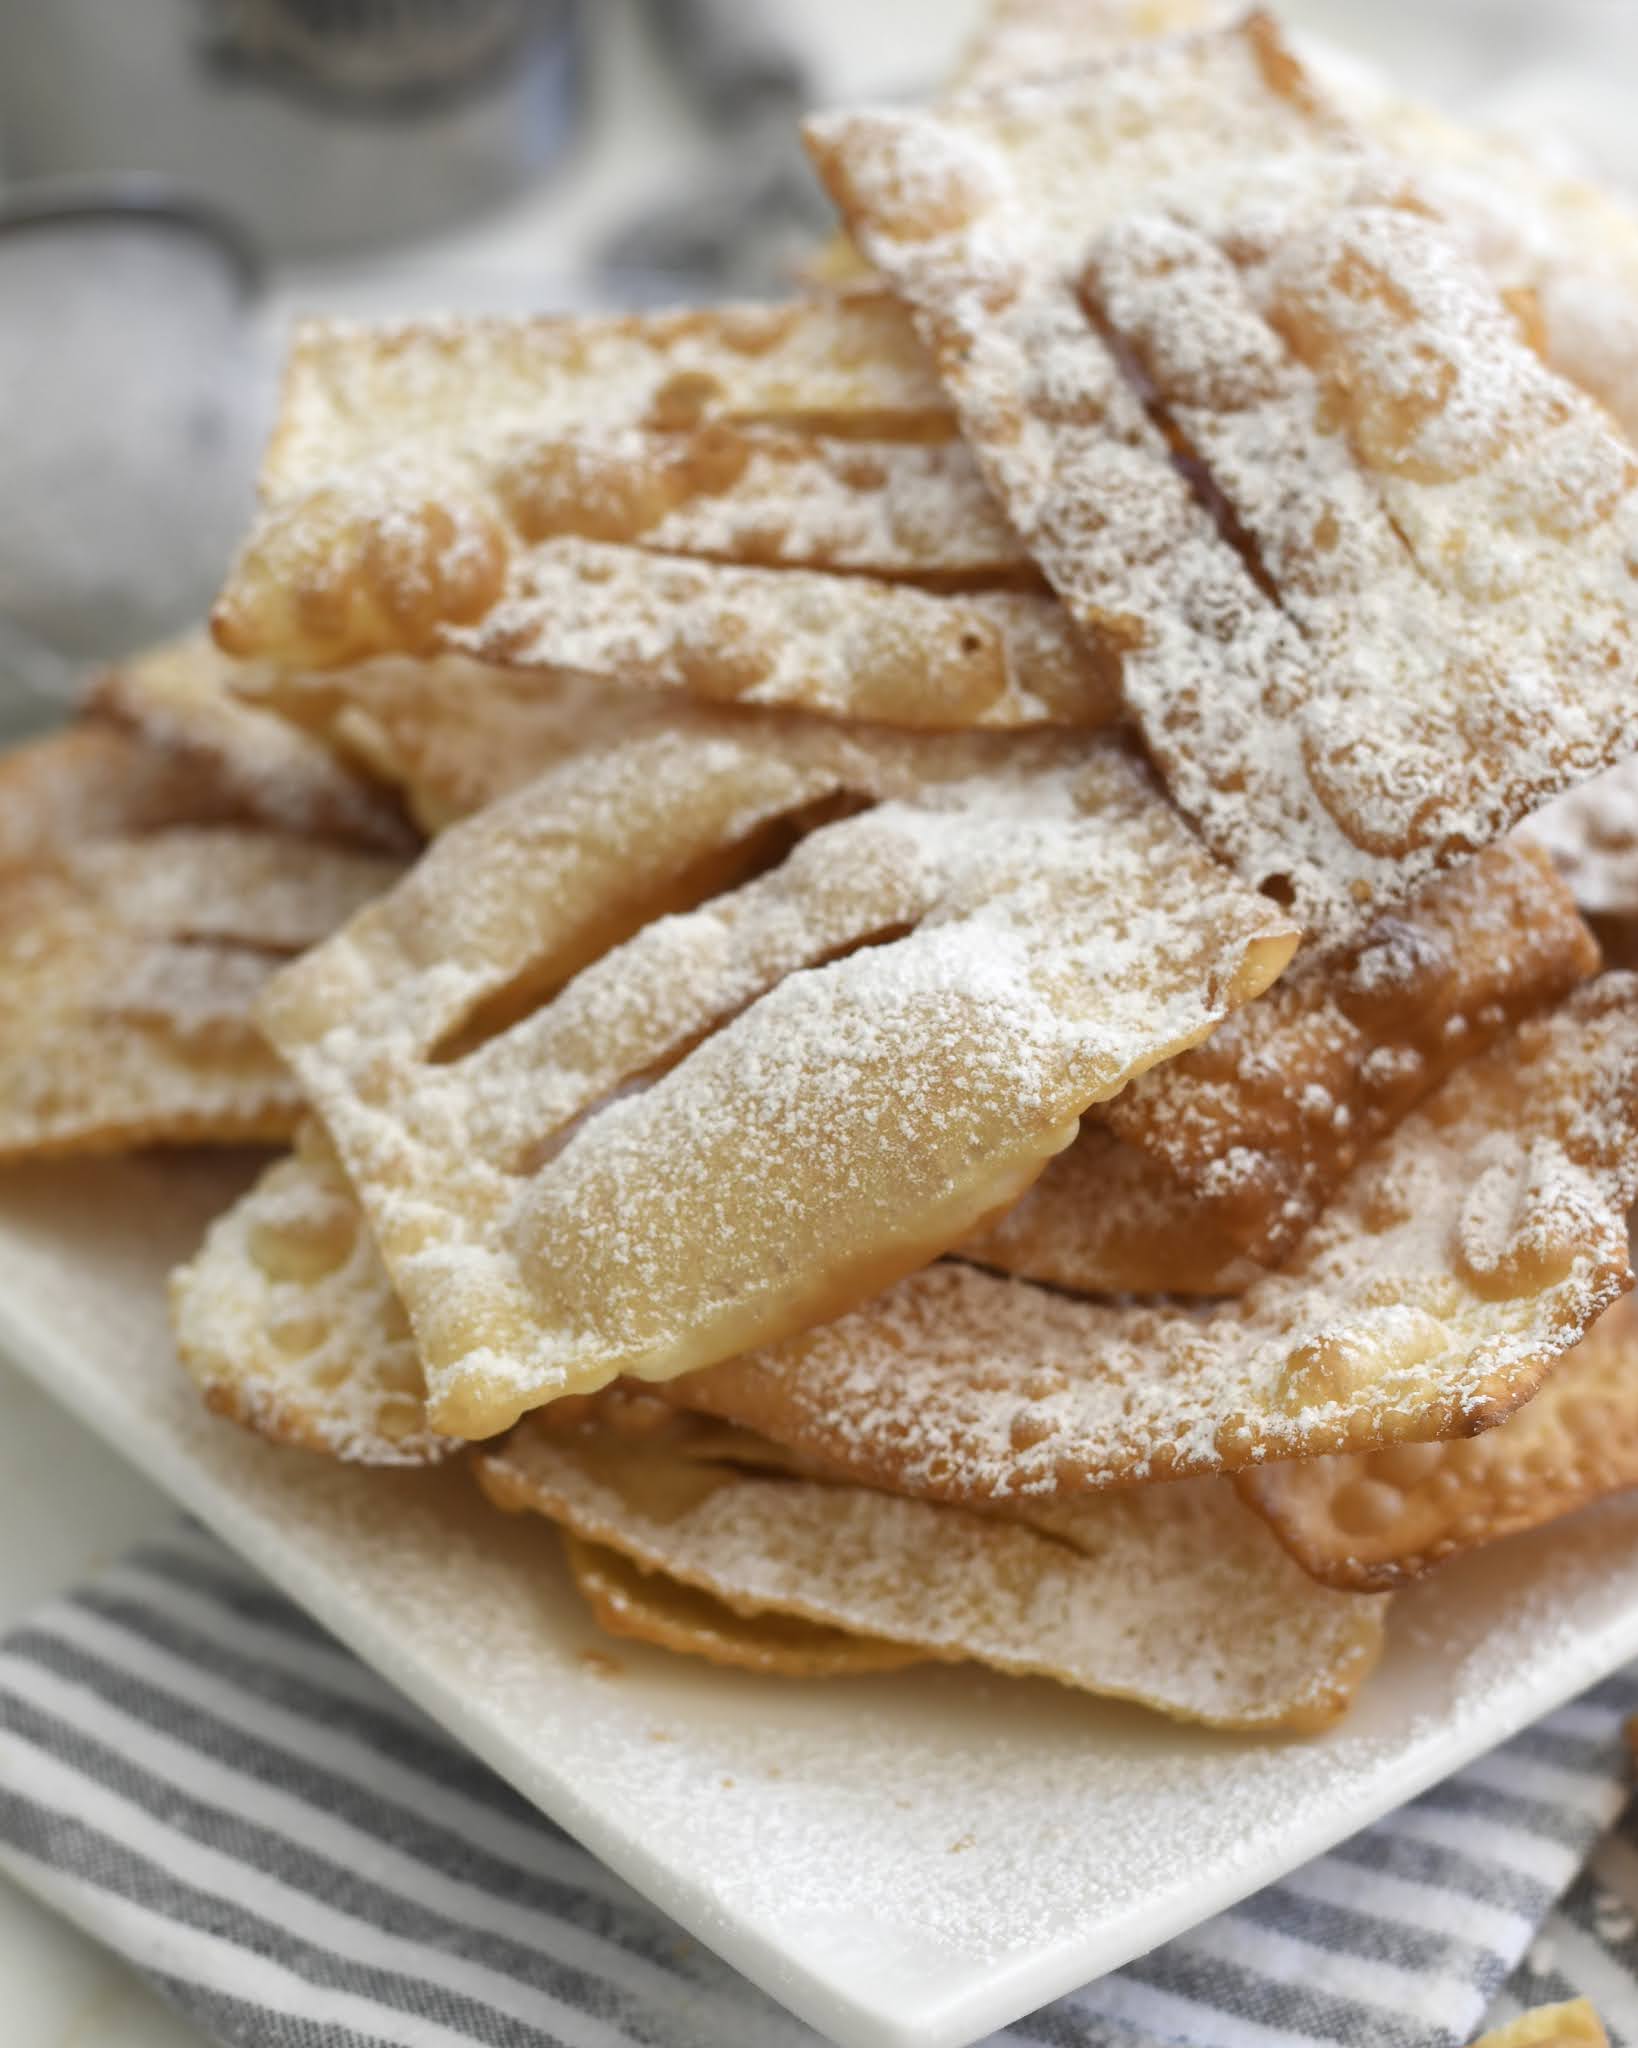 Cooking with Manuela: Chiacchiere di Carnevale - Italian Crispy Fried ...